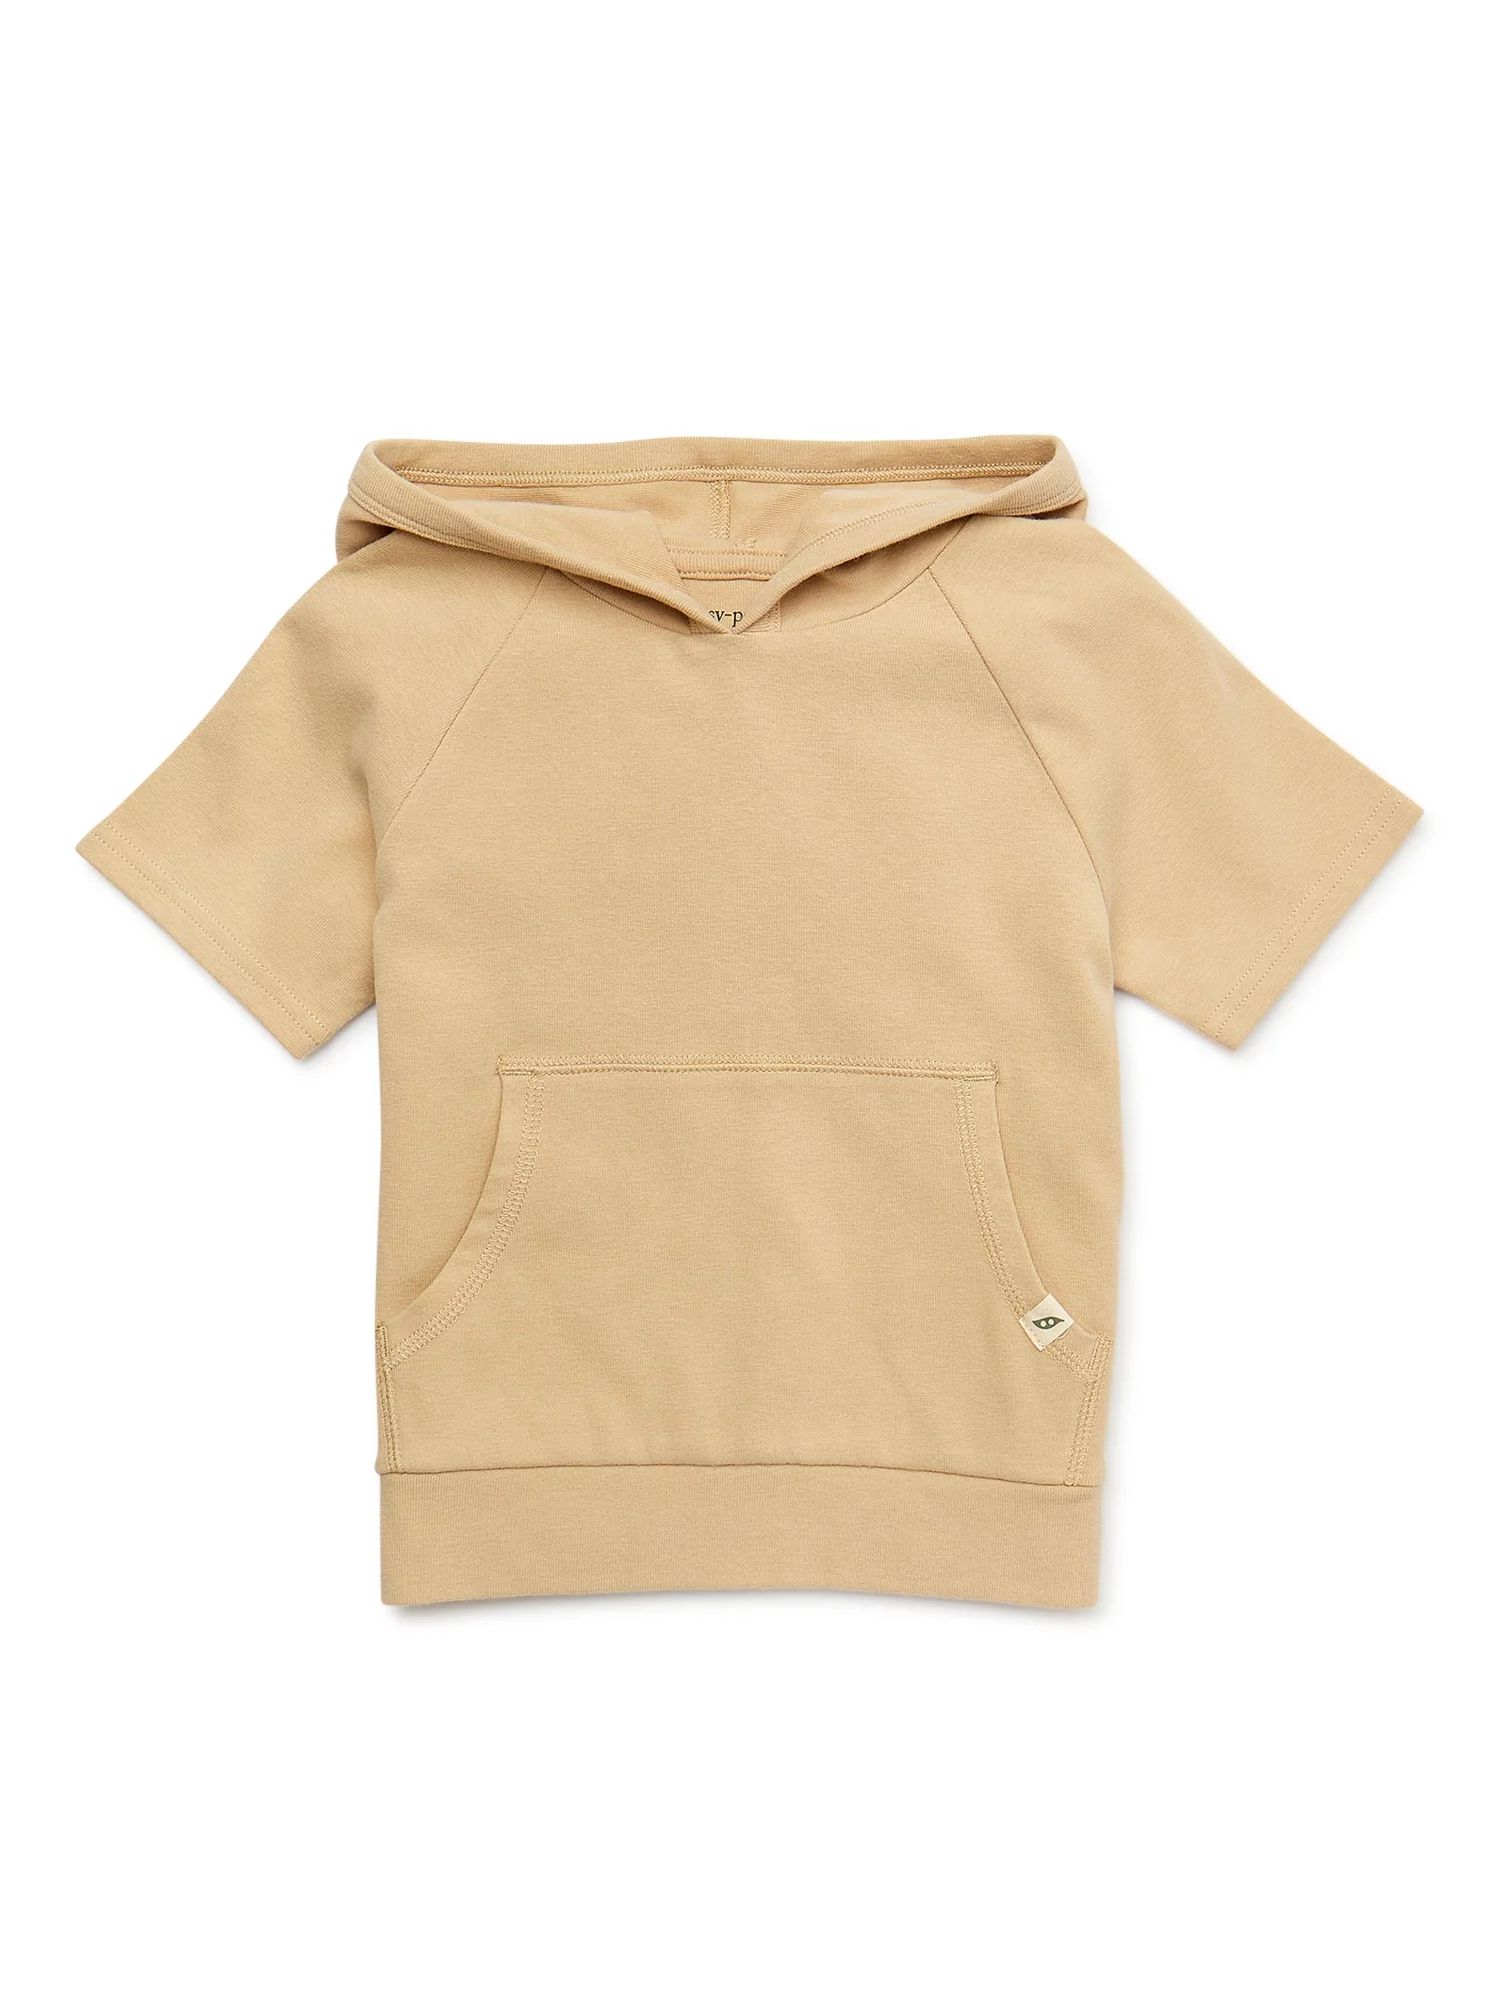 easy-peasyeasy-peasy Toddler Boy Short Sleeve Hoodie, Sizes 12M-5TUSD$10.00(5.0)5 stars out of 7 ... | Walmart (US)